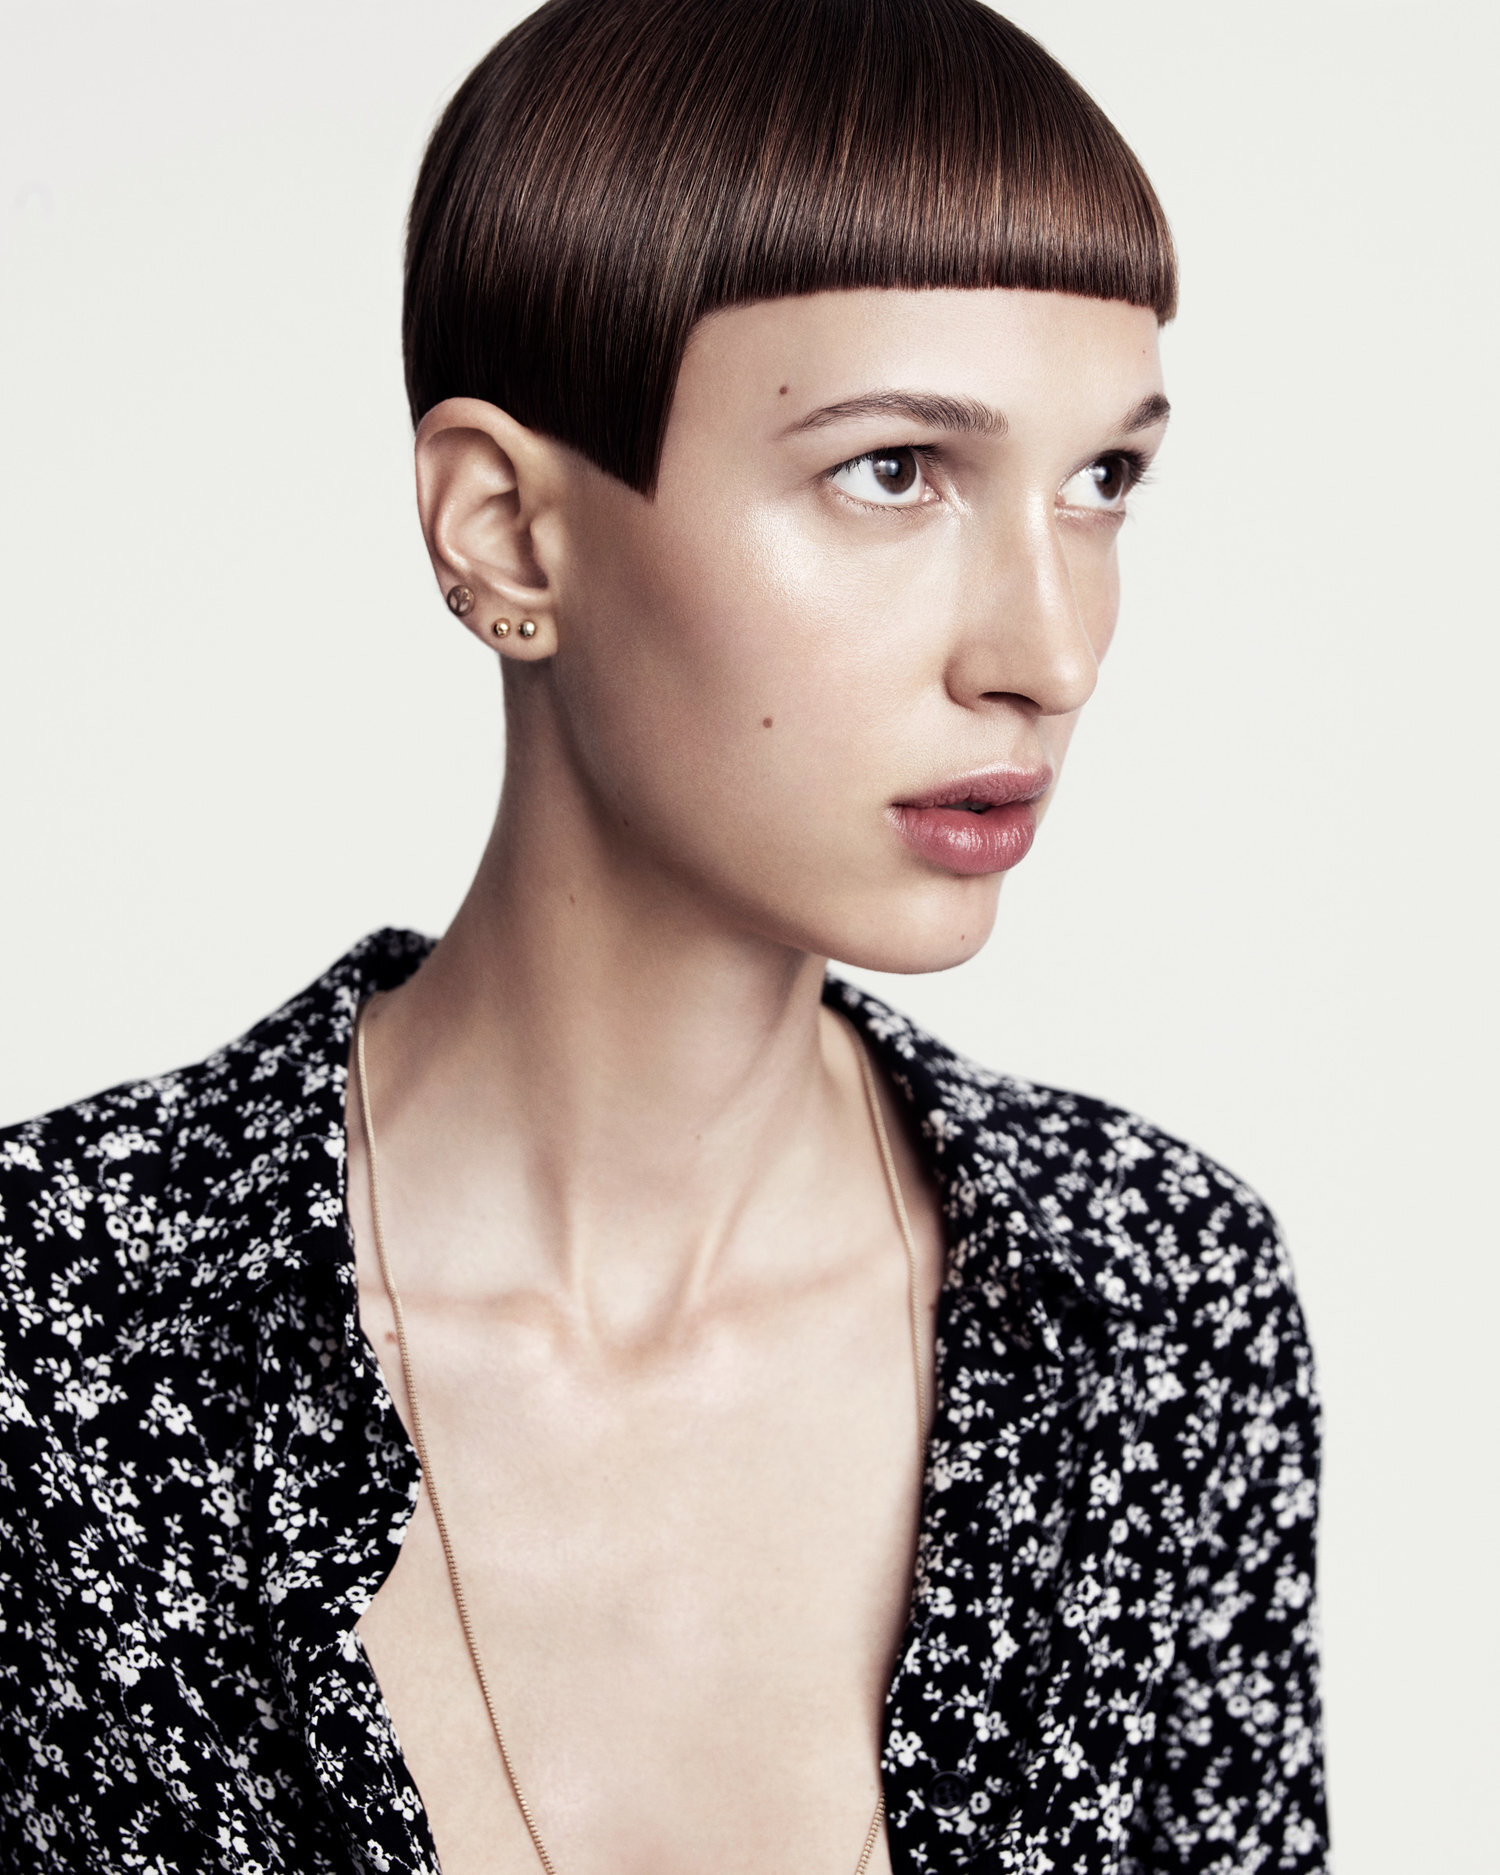 Female model with short structured brunette hair styled by Tom Connell